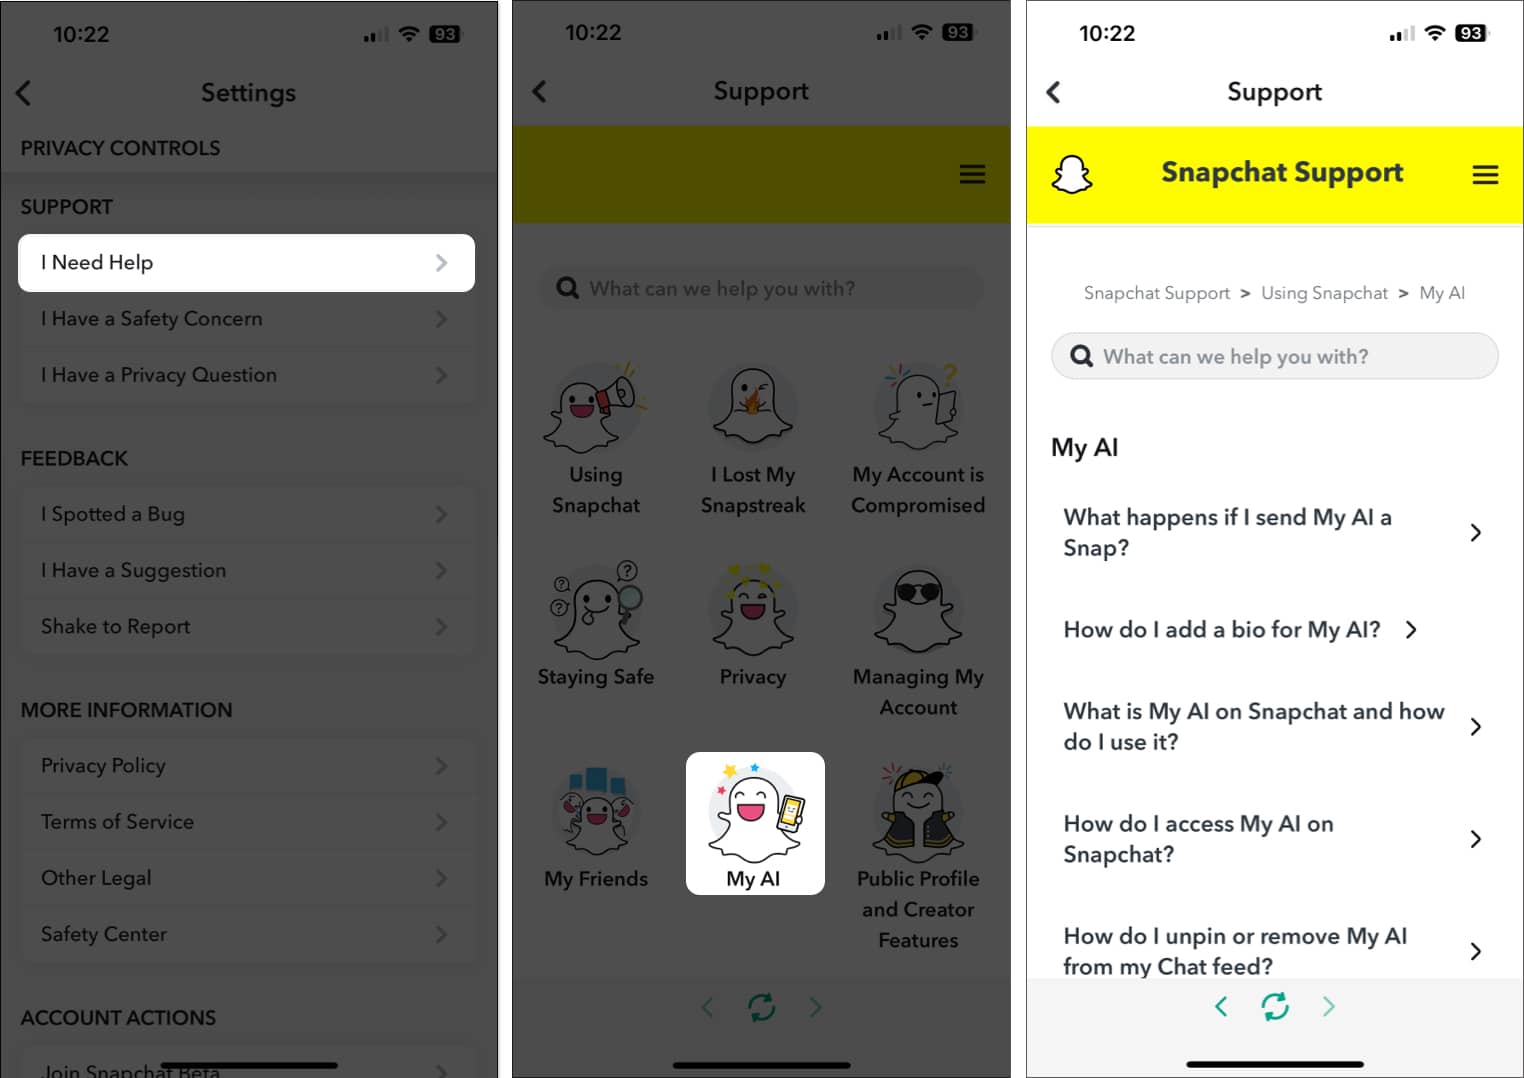 Contact Snapchat Support